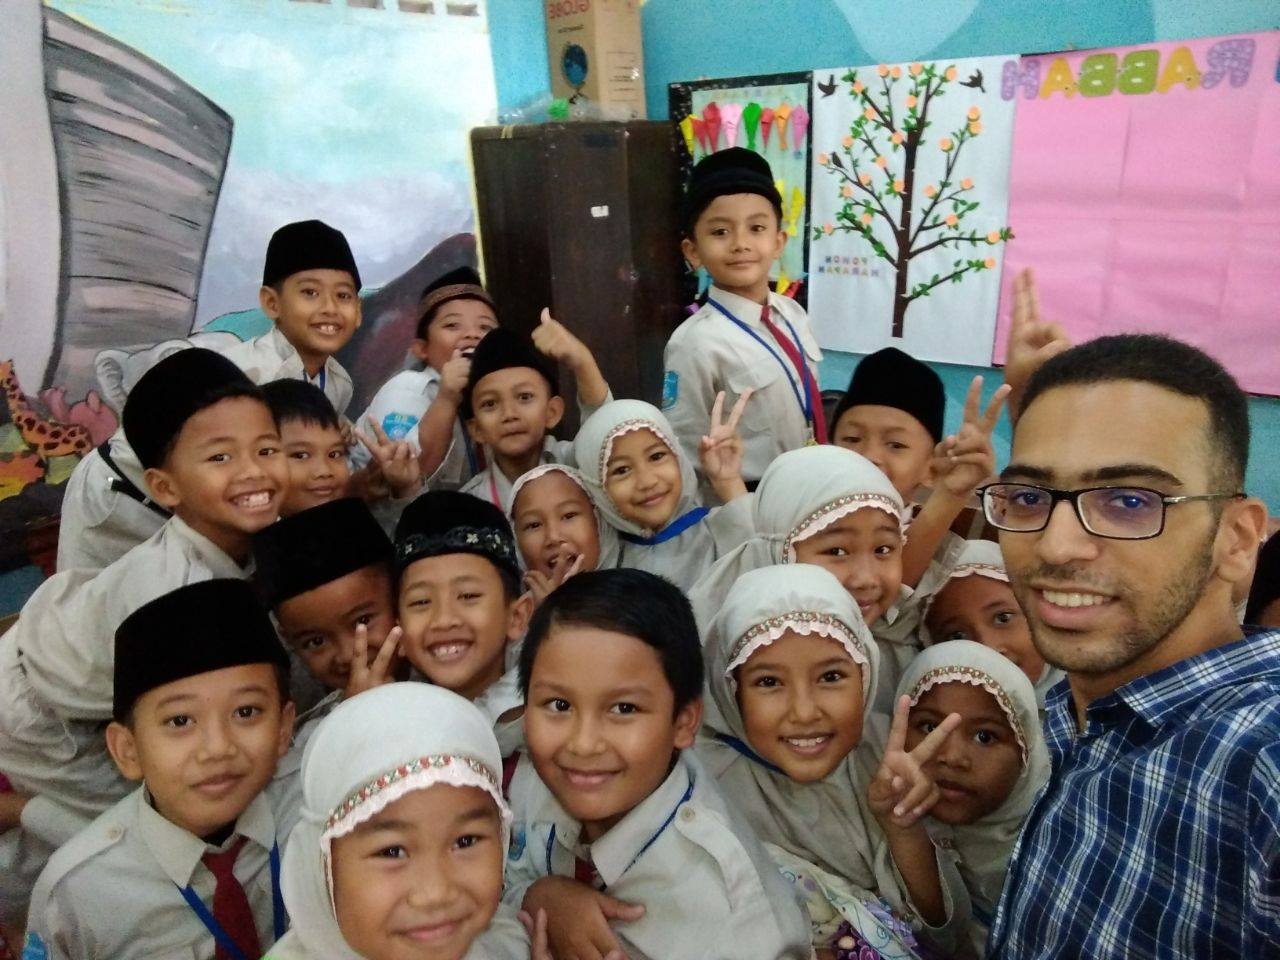 Darmasiswa UAD Conducted International Community Service Program. They had experiences of teaching language and culture at schools